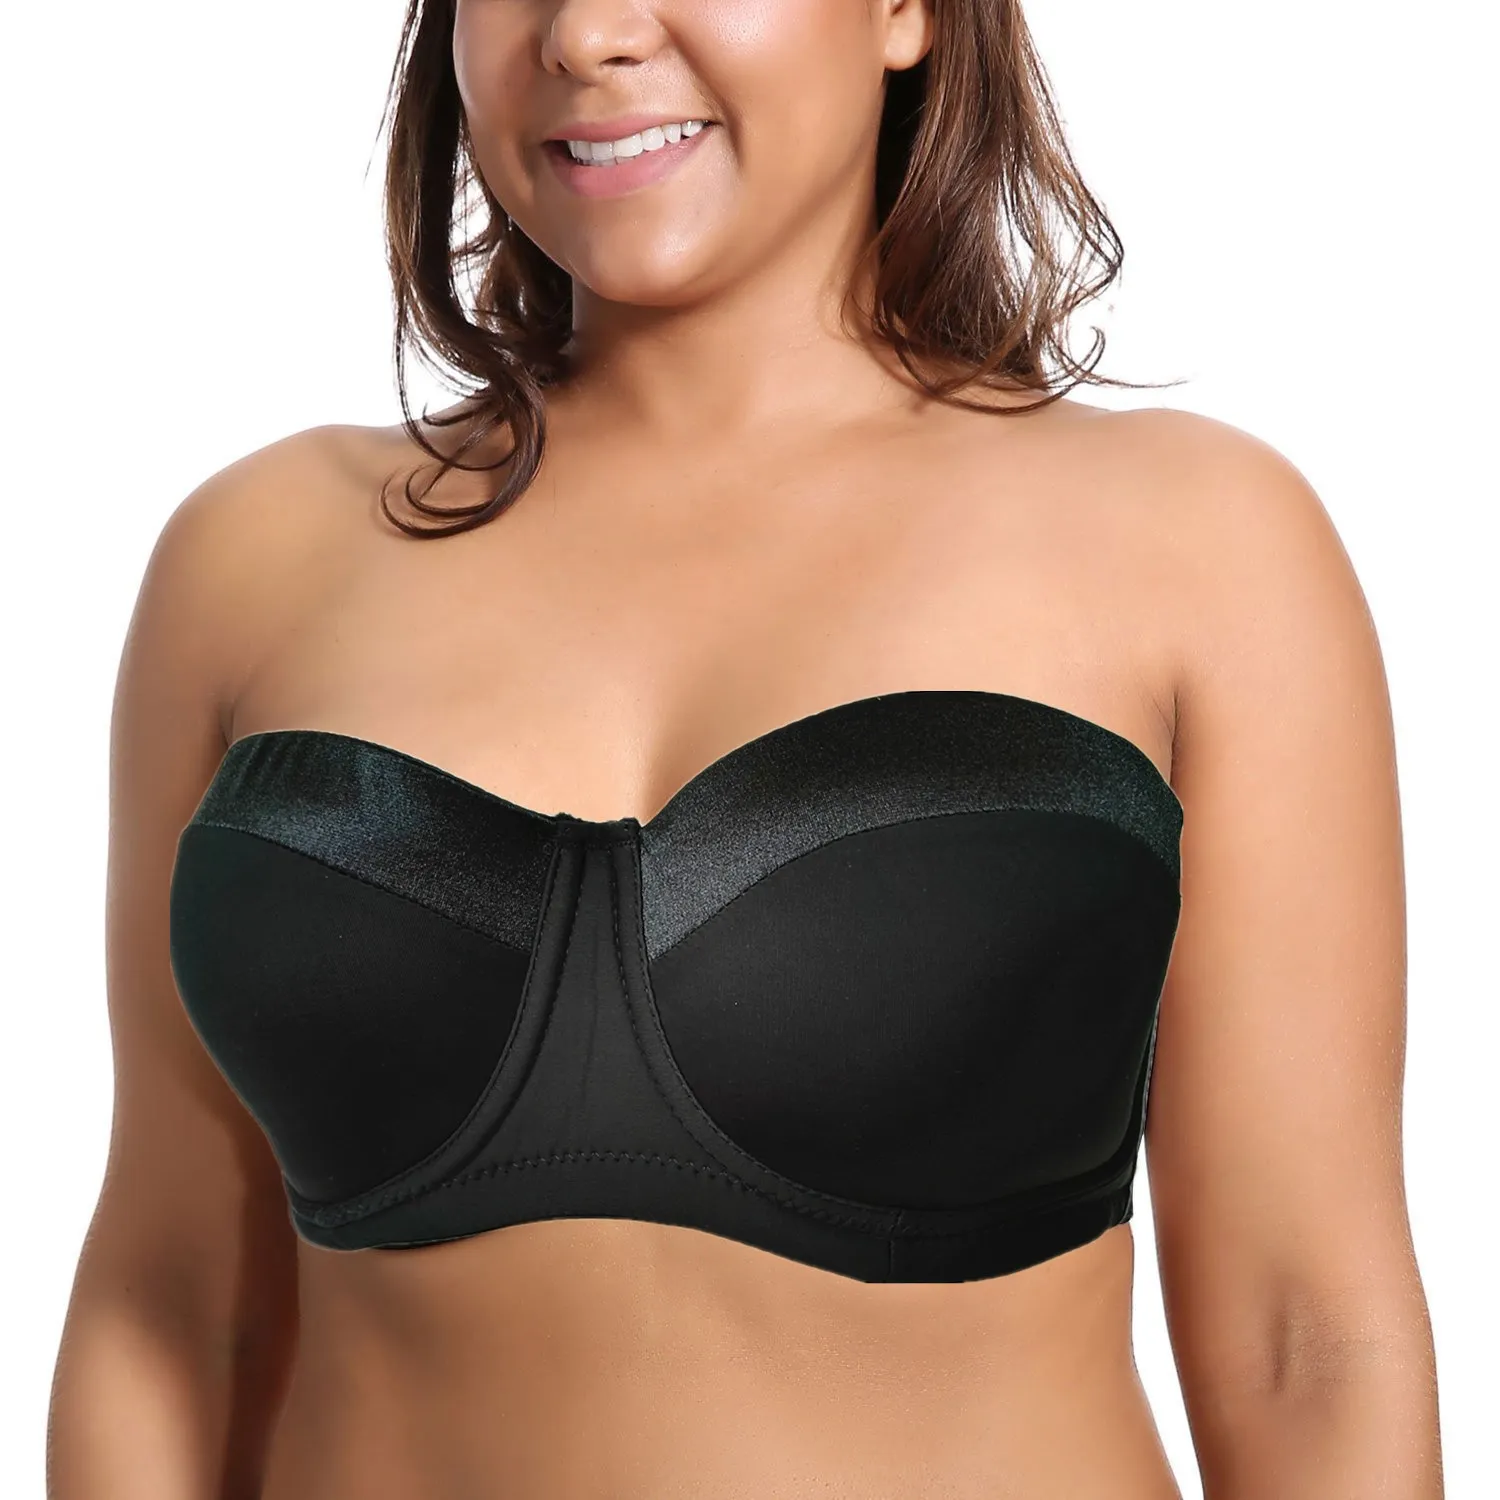 Strapless Bras for Women Push Up Plus Size Underwire -Slip Silicone Padded Bandeau  Bra Tube Tops Bra 